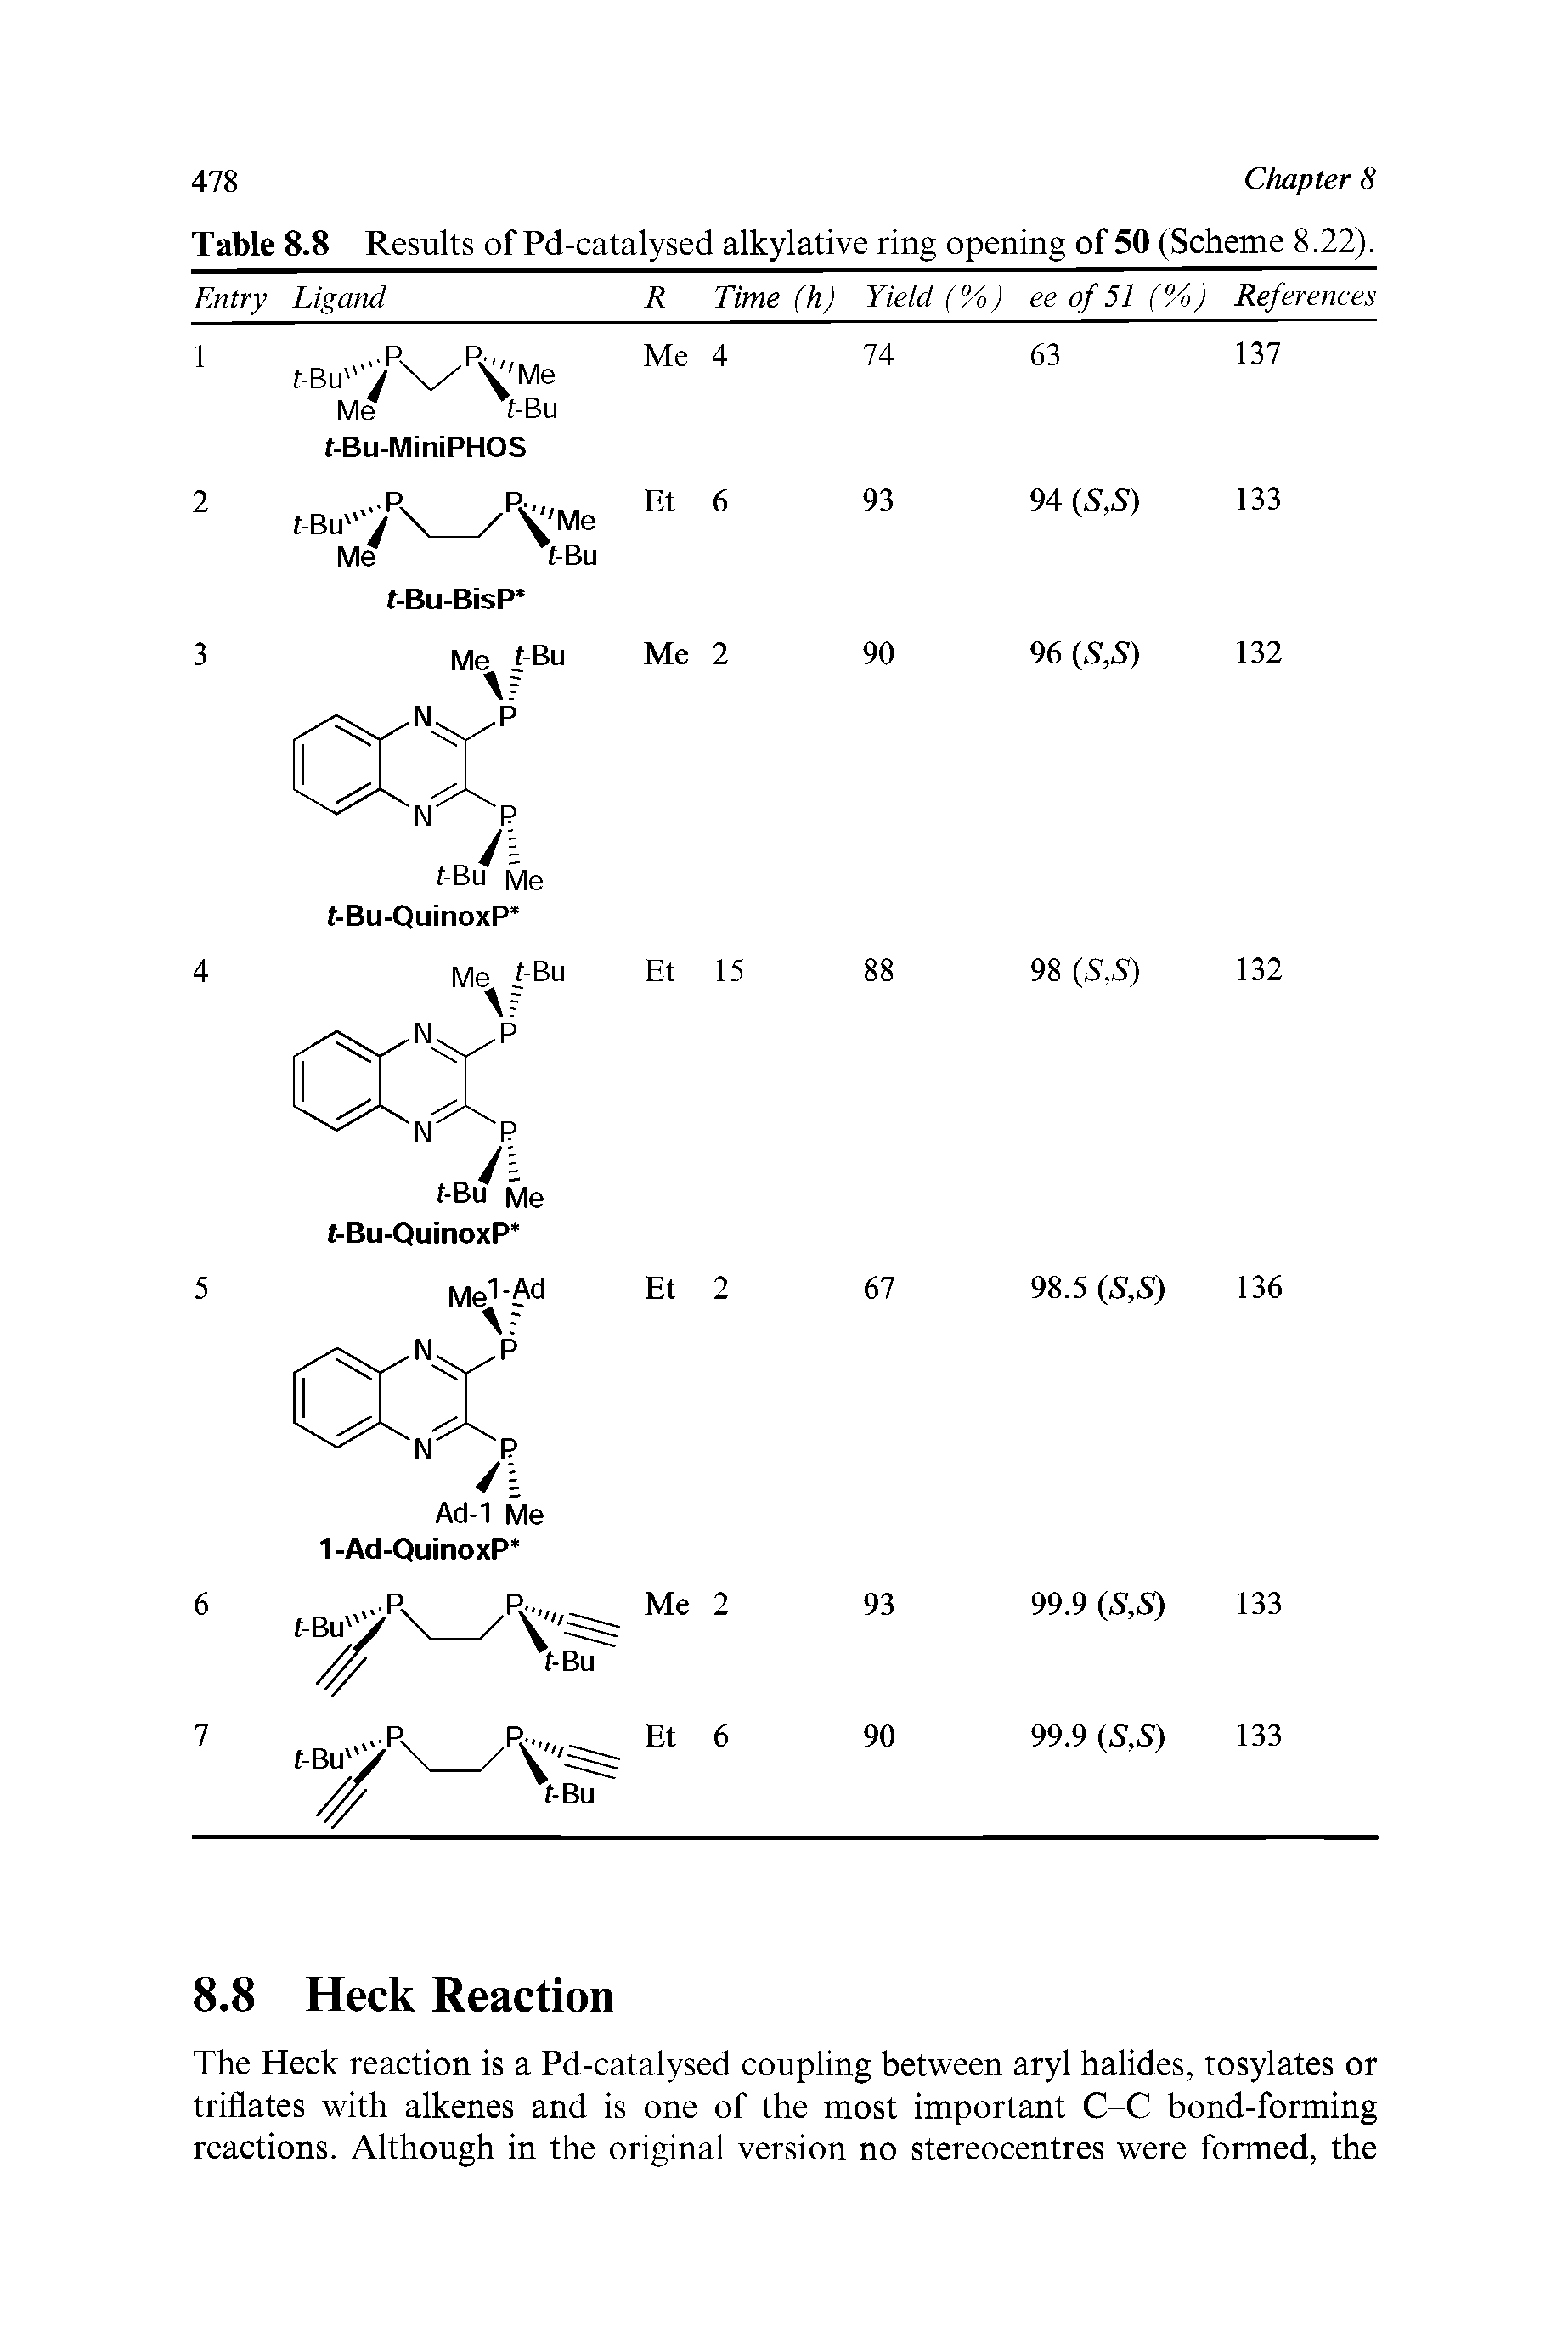 Table 8.8 Results of Pd-catalysed alkylative ring opening of 50 (Scheme 8.22).